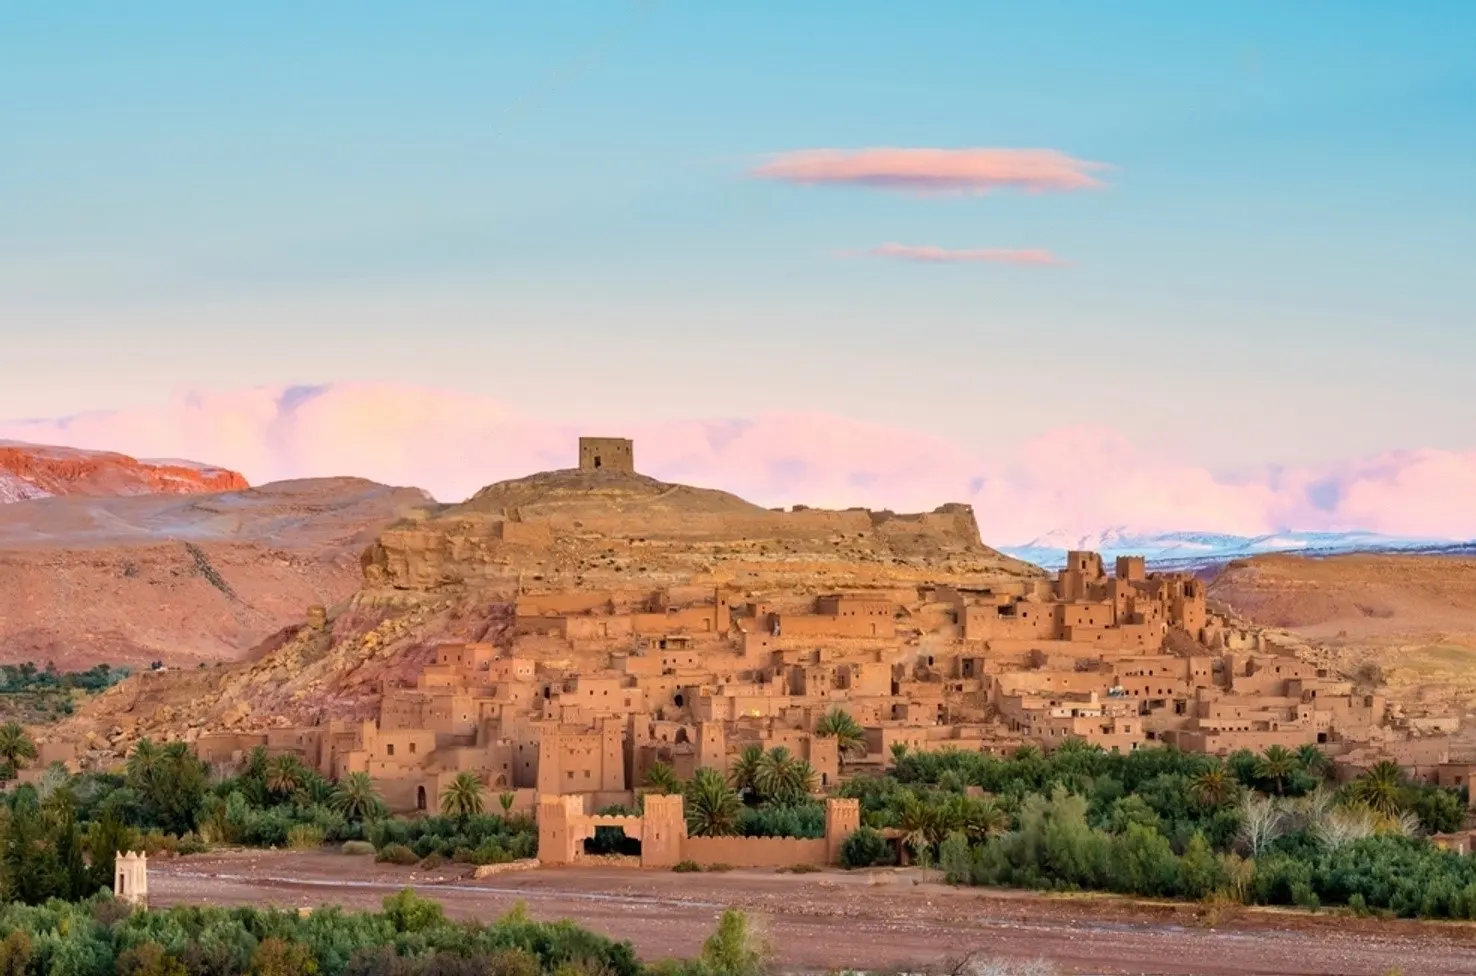 Imouzzer-Marmoucha-a-Forgotten-city-in-the-Middle-Atlas-Mountains-old-fortified-village.webp